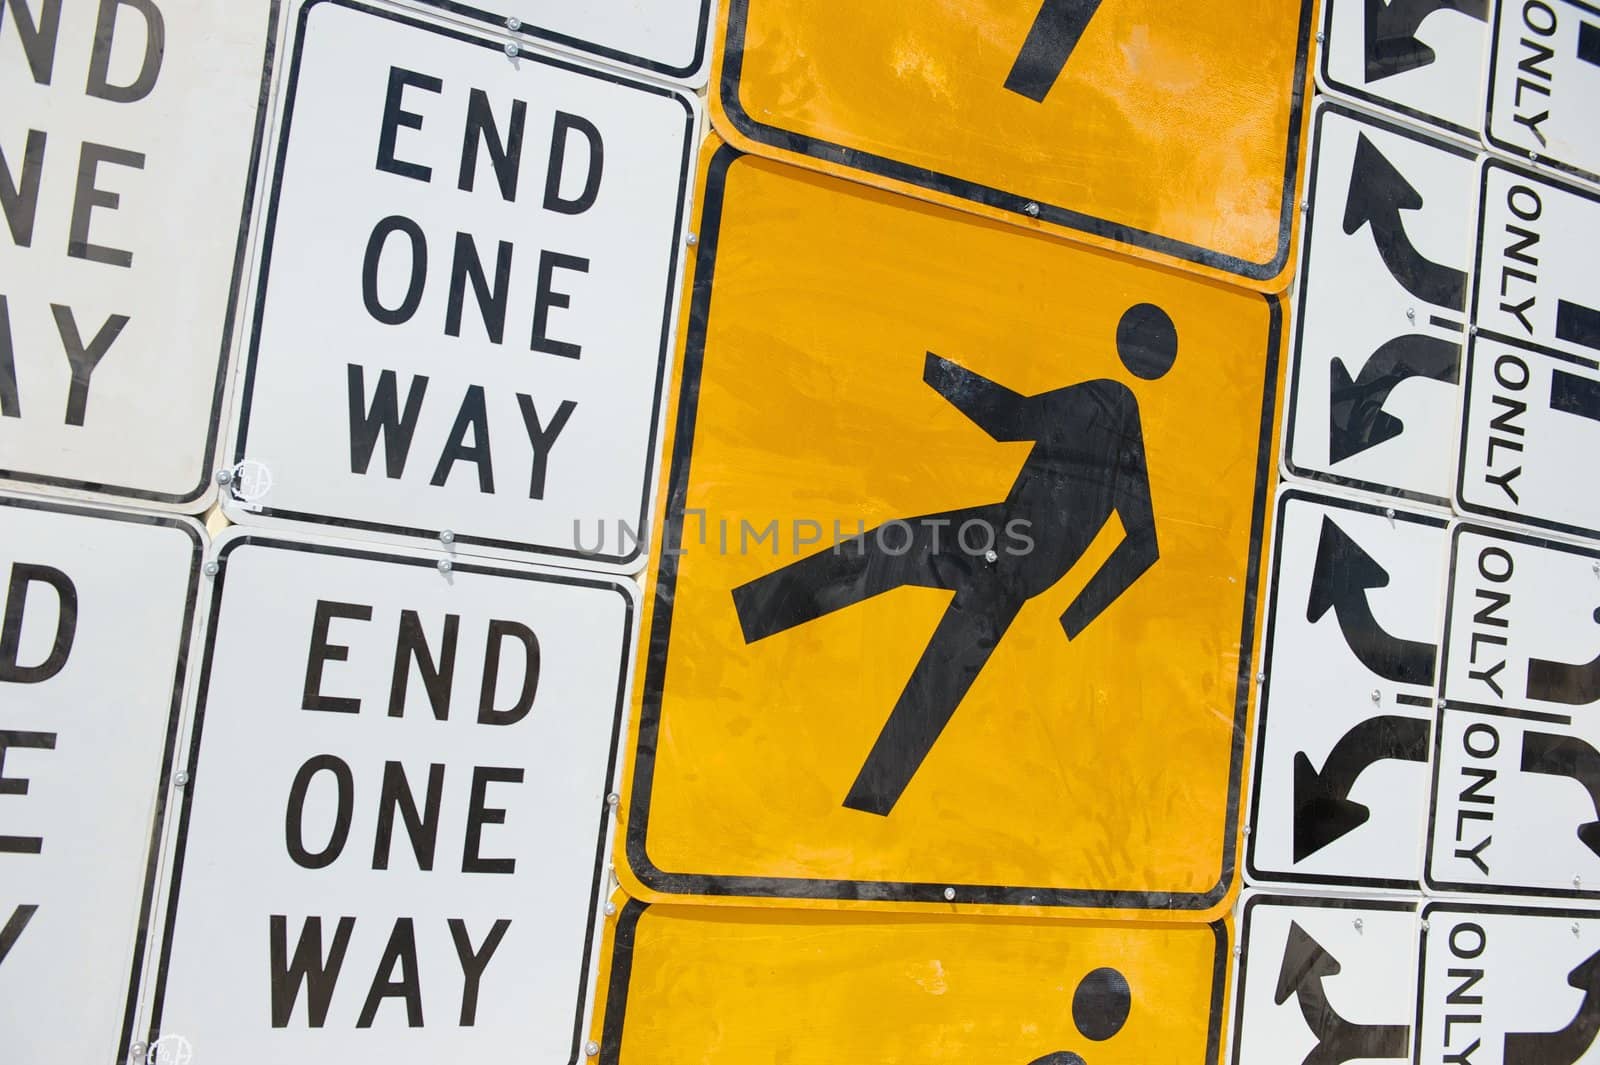 Wall of Road Warning Signs by pixelsnap